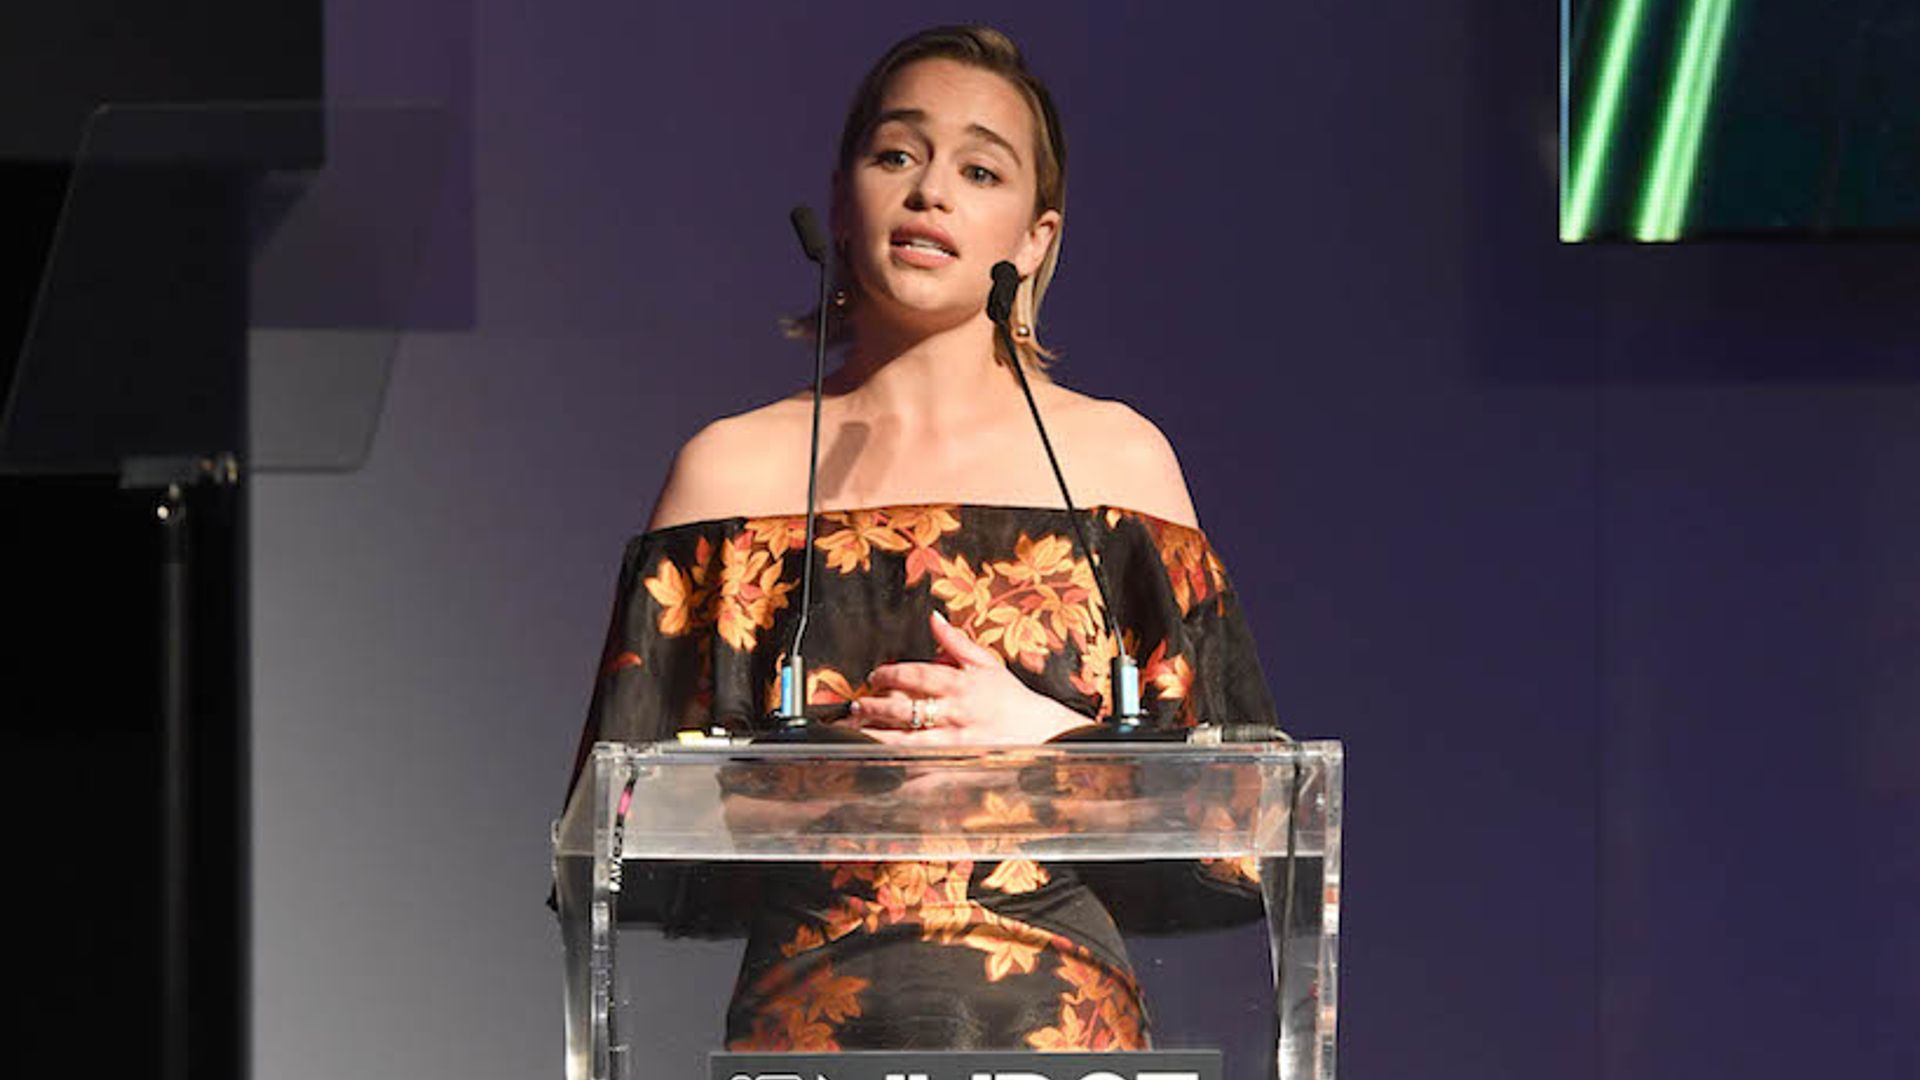 Emilia Clarke pays emotional tribute to the nurses that cared for her late father